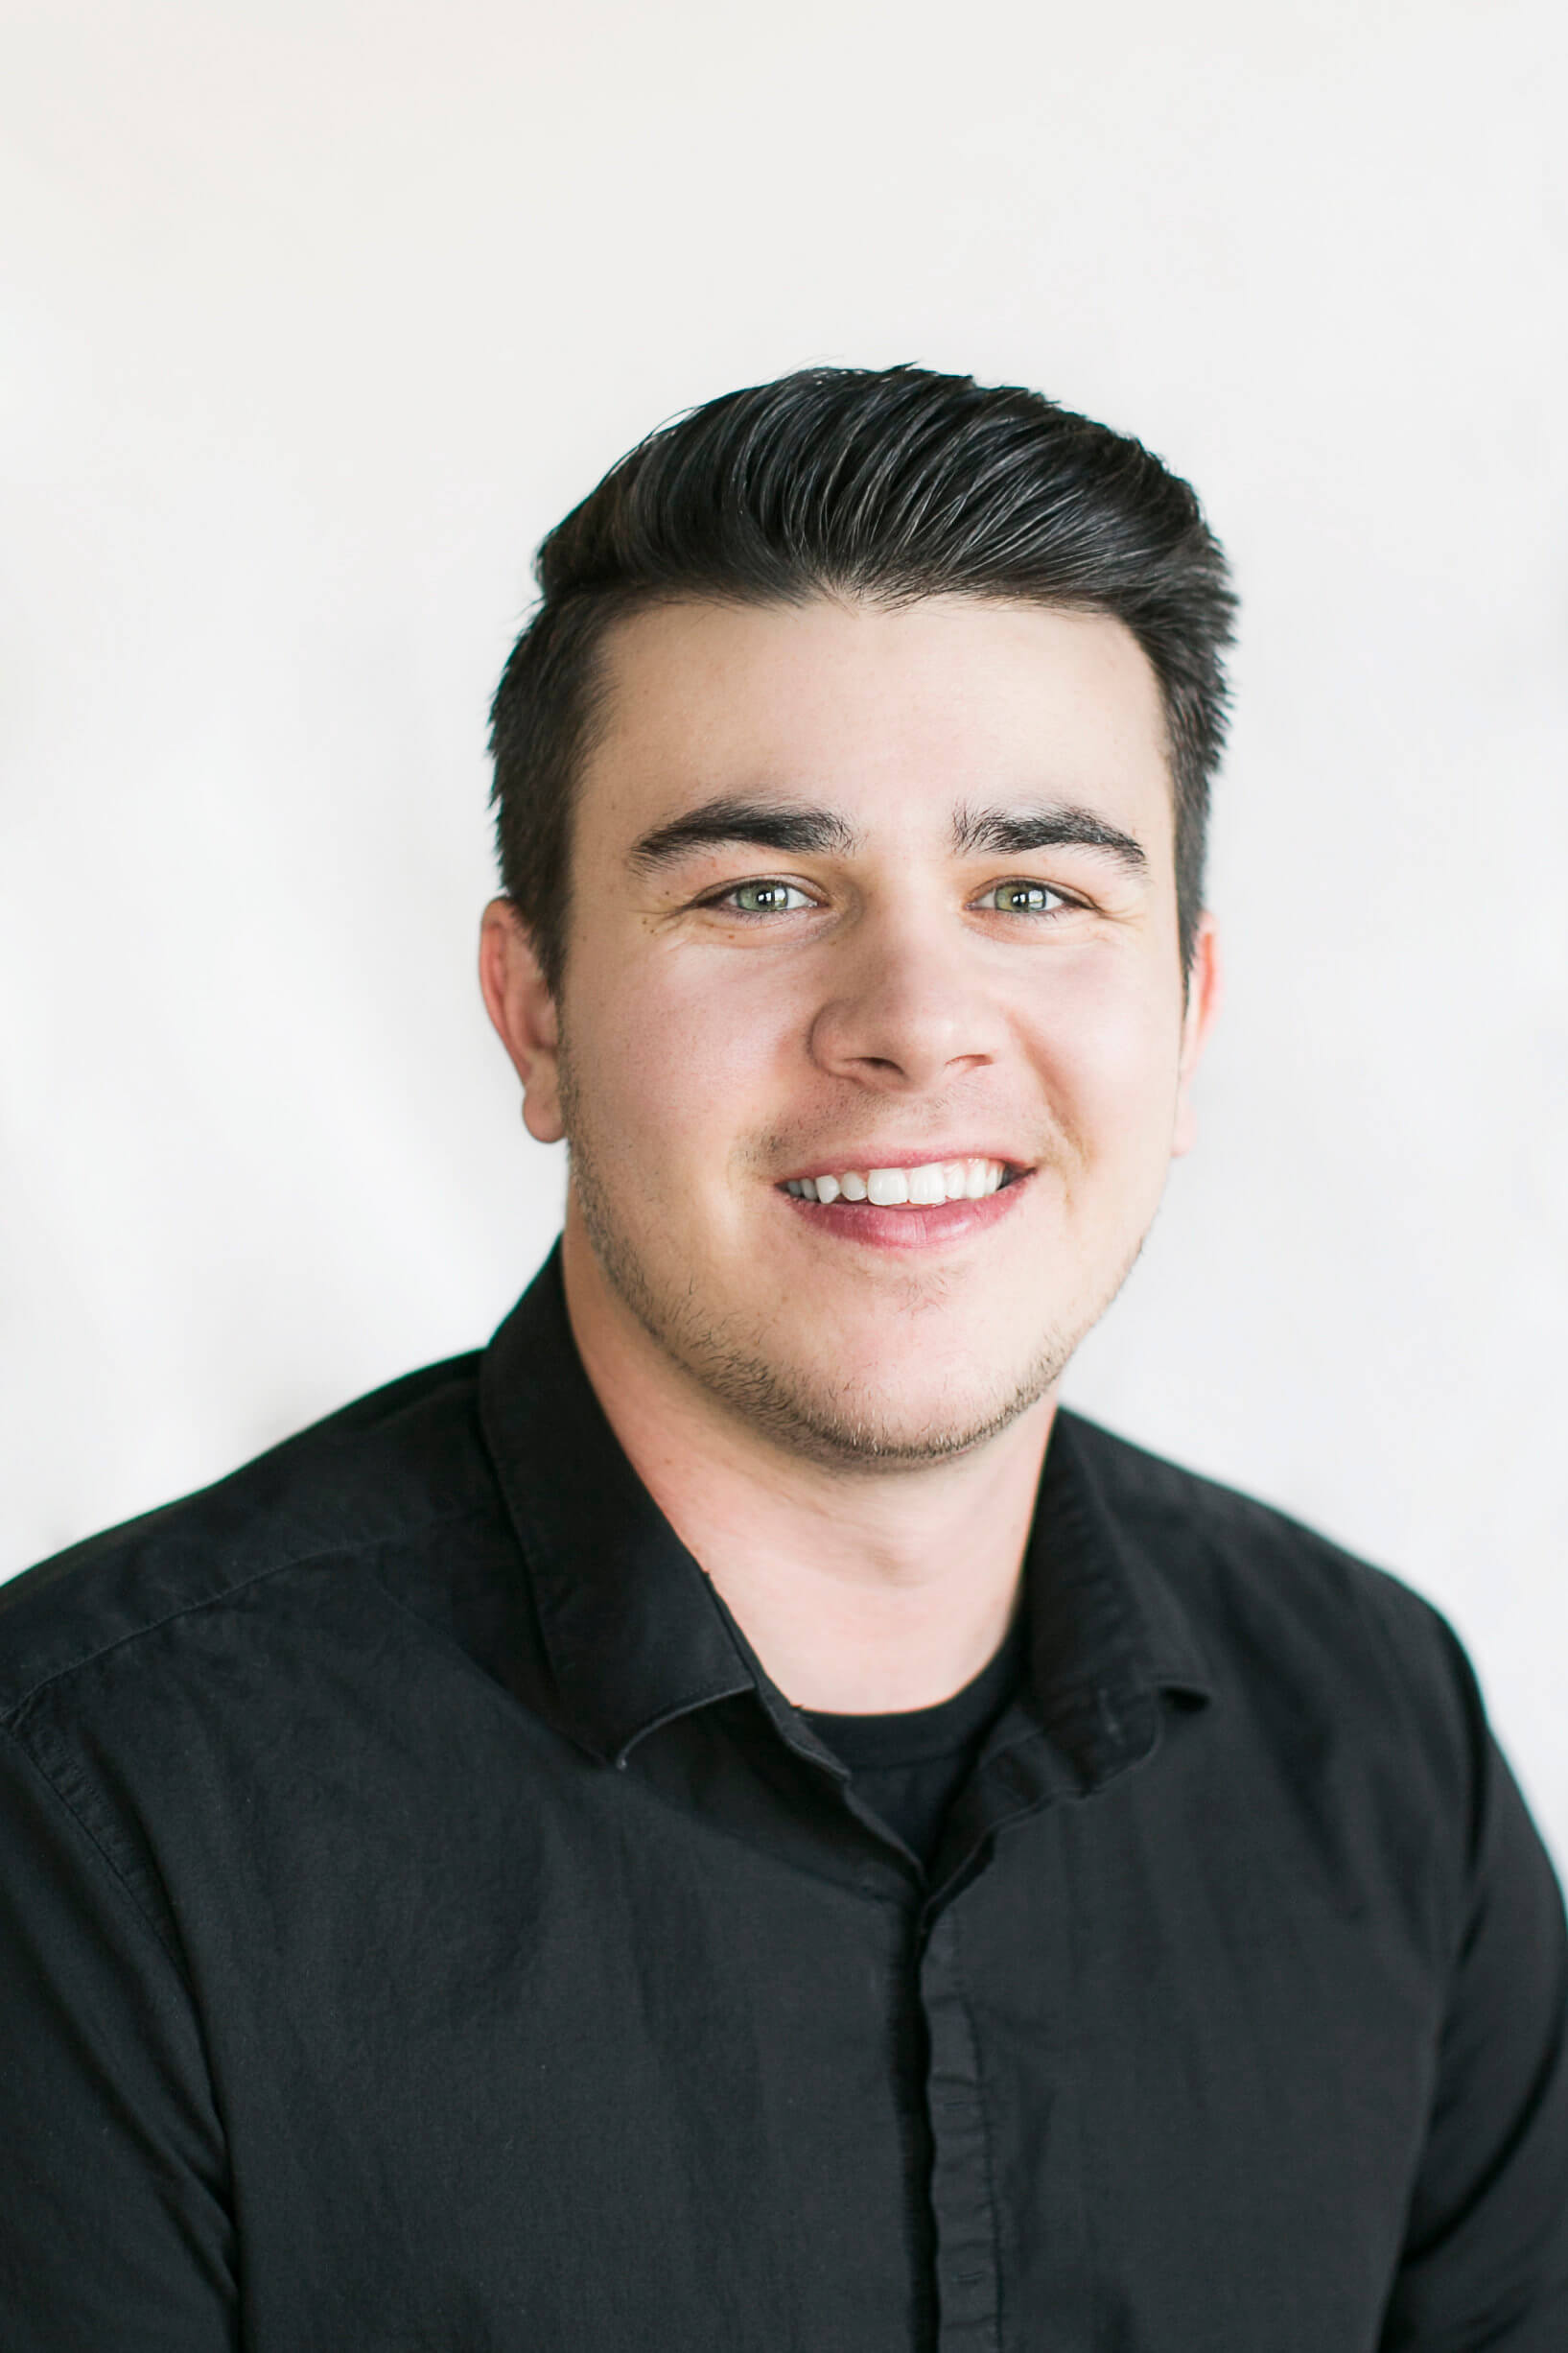 A headshot of Kalen Smith, Burley Physical Therapy office manager.